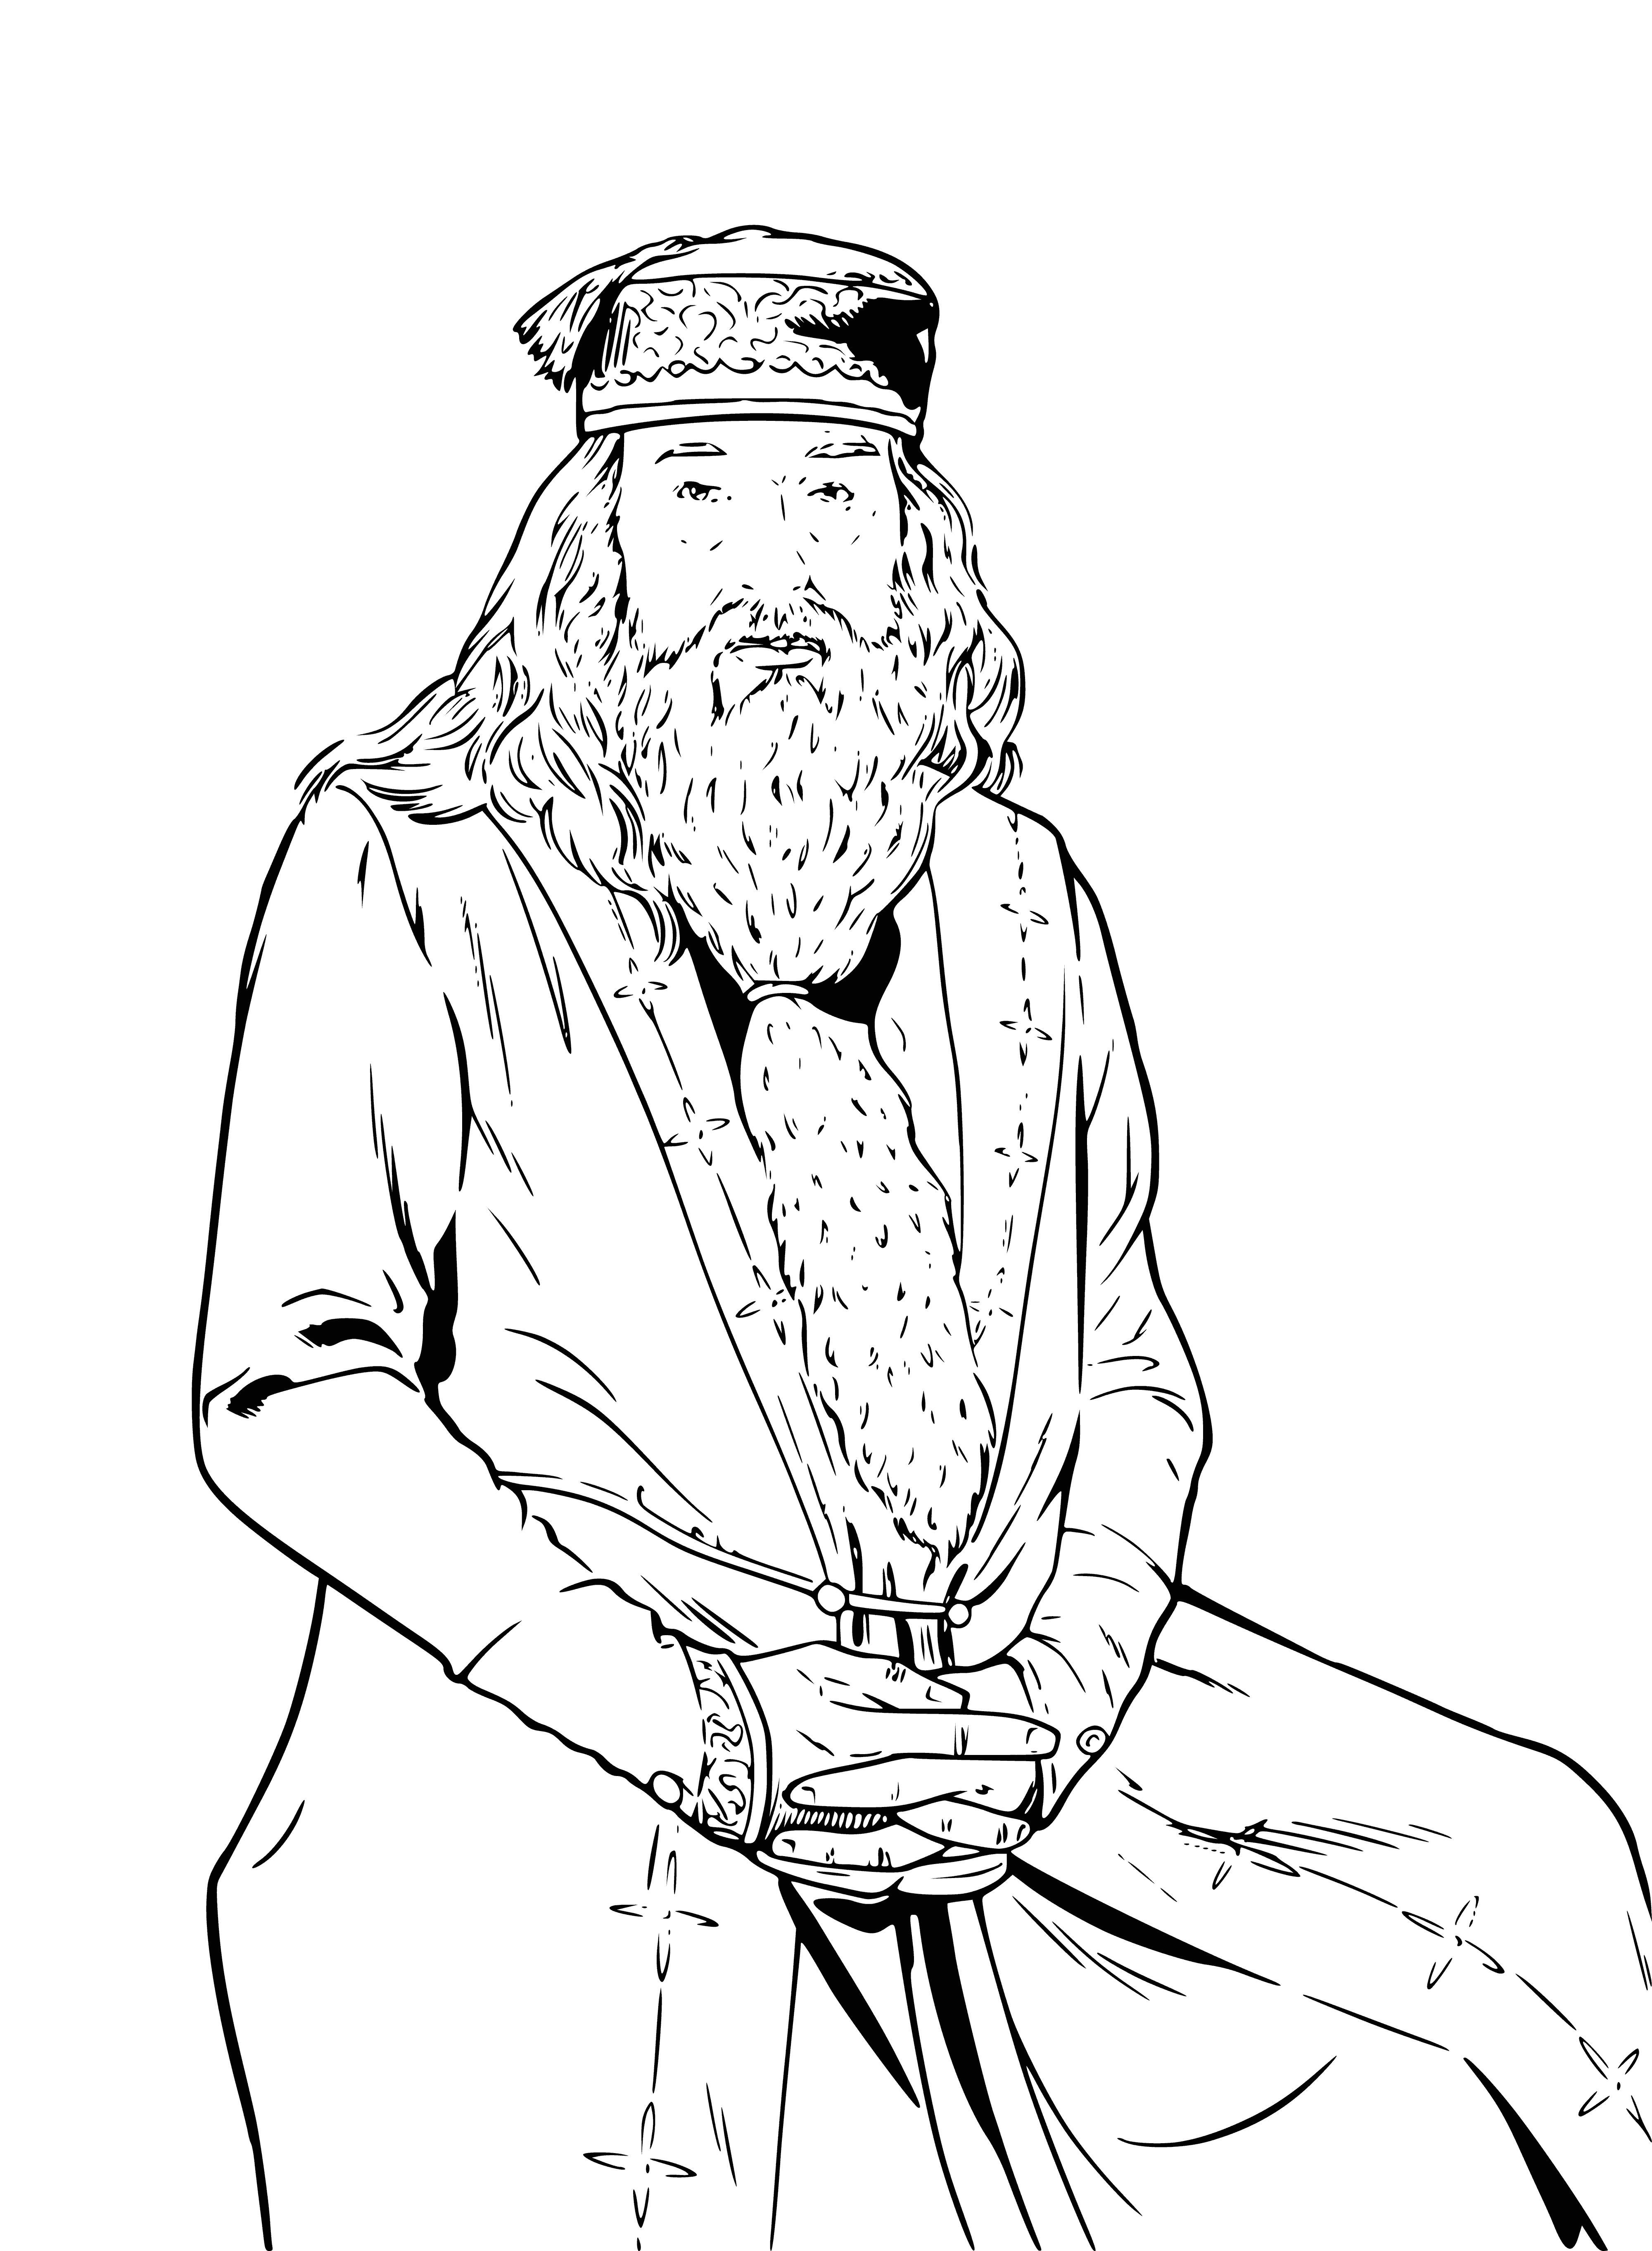 coloring page: Three young students, Harry, Ron, and Hermione, look up at elderly wizard Dumbledore wearing purple robes and holding a wand with a kind expression. #HarryPotter